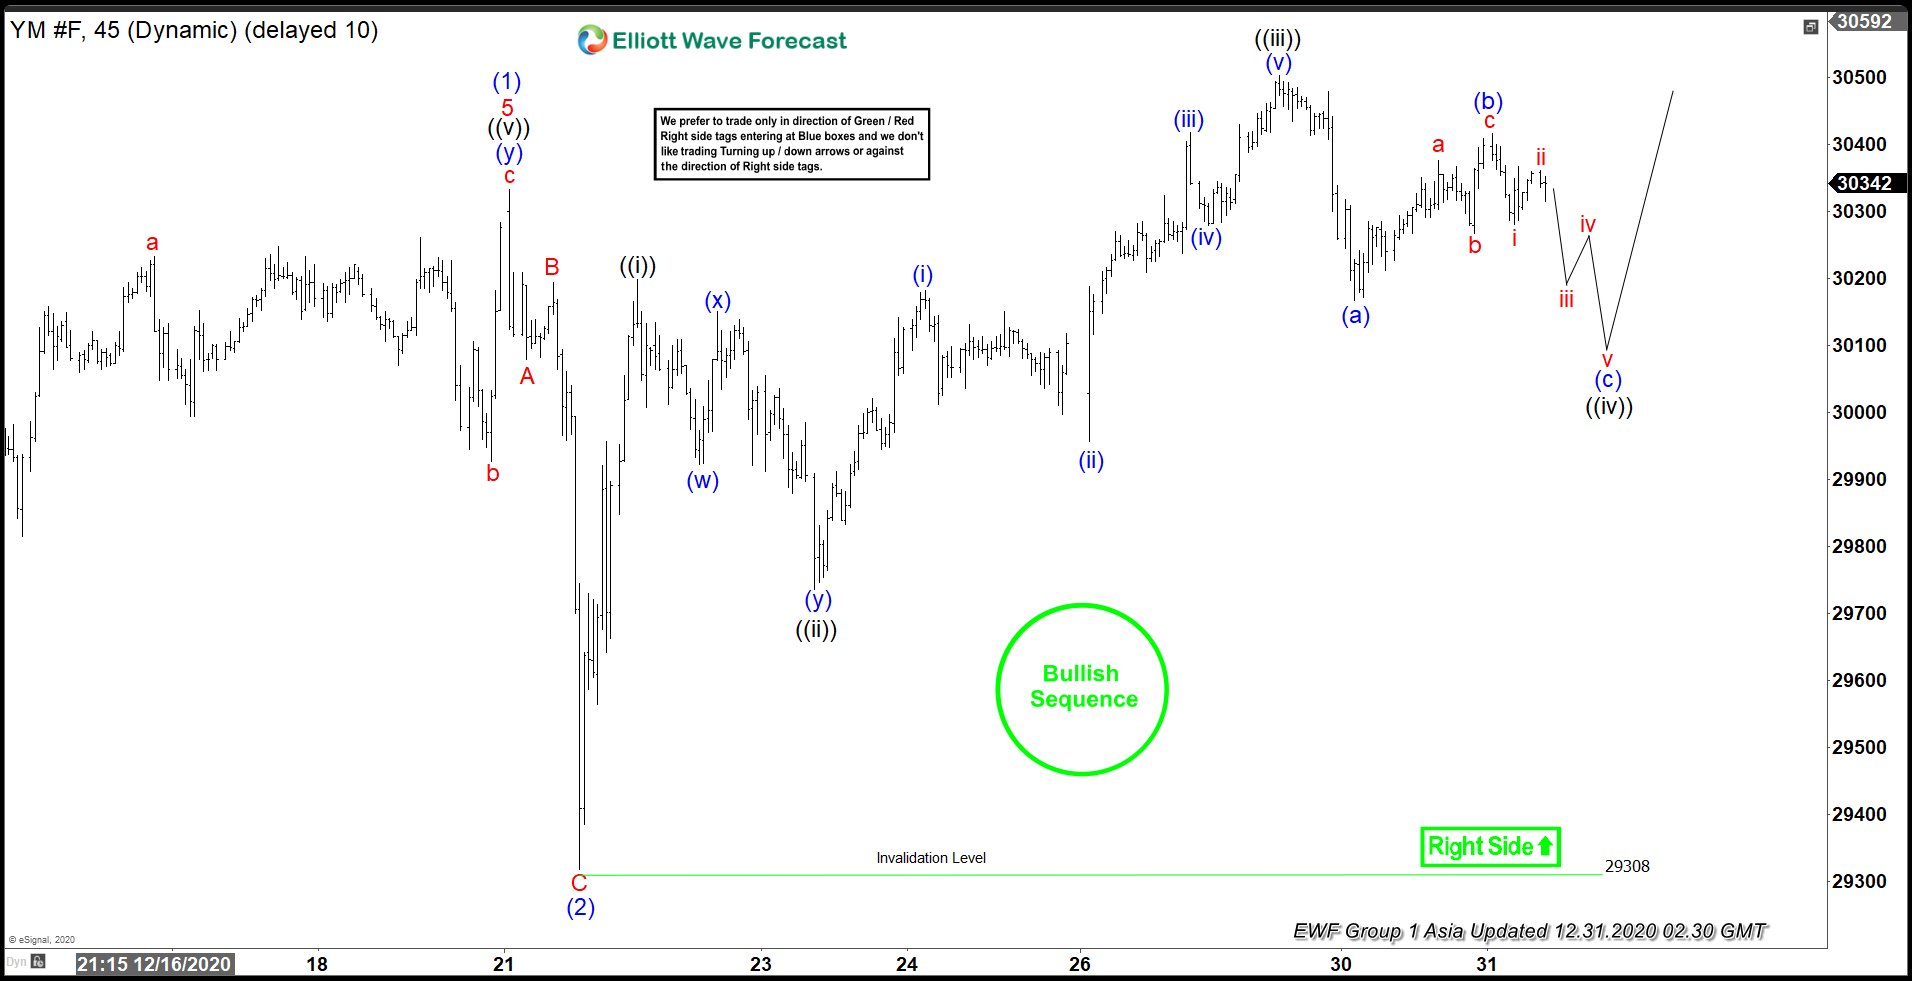 Elliott Wave View: Dow Futures (YM) Remains Bullish as We End Year 2020